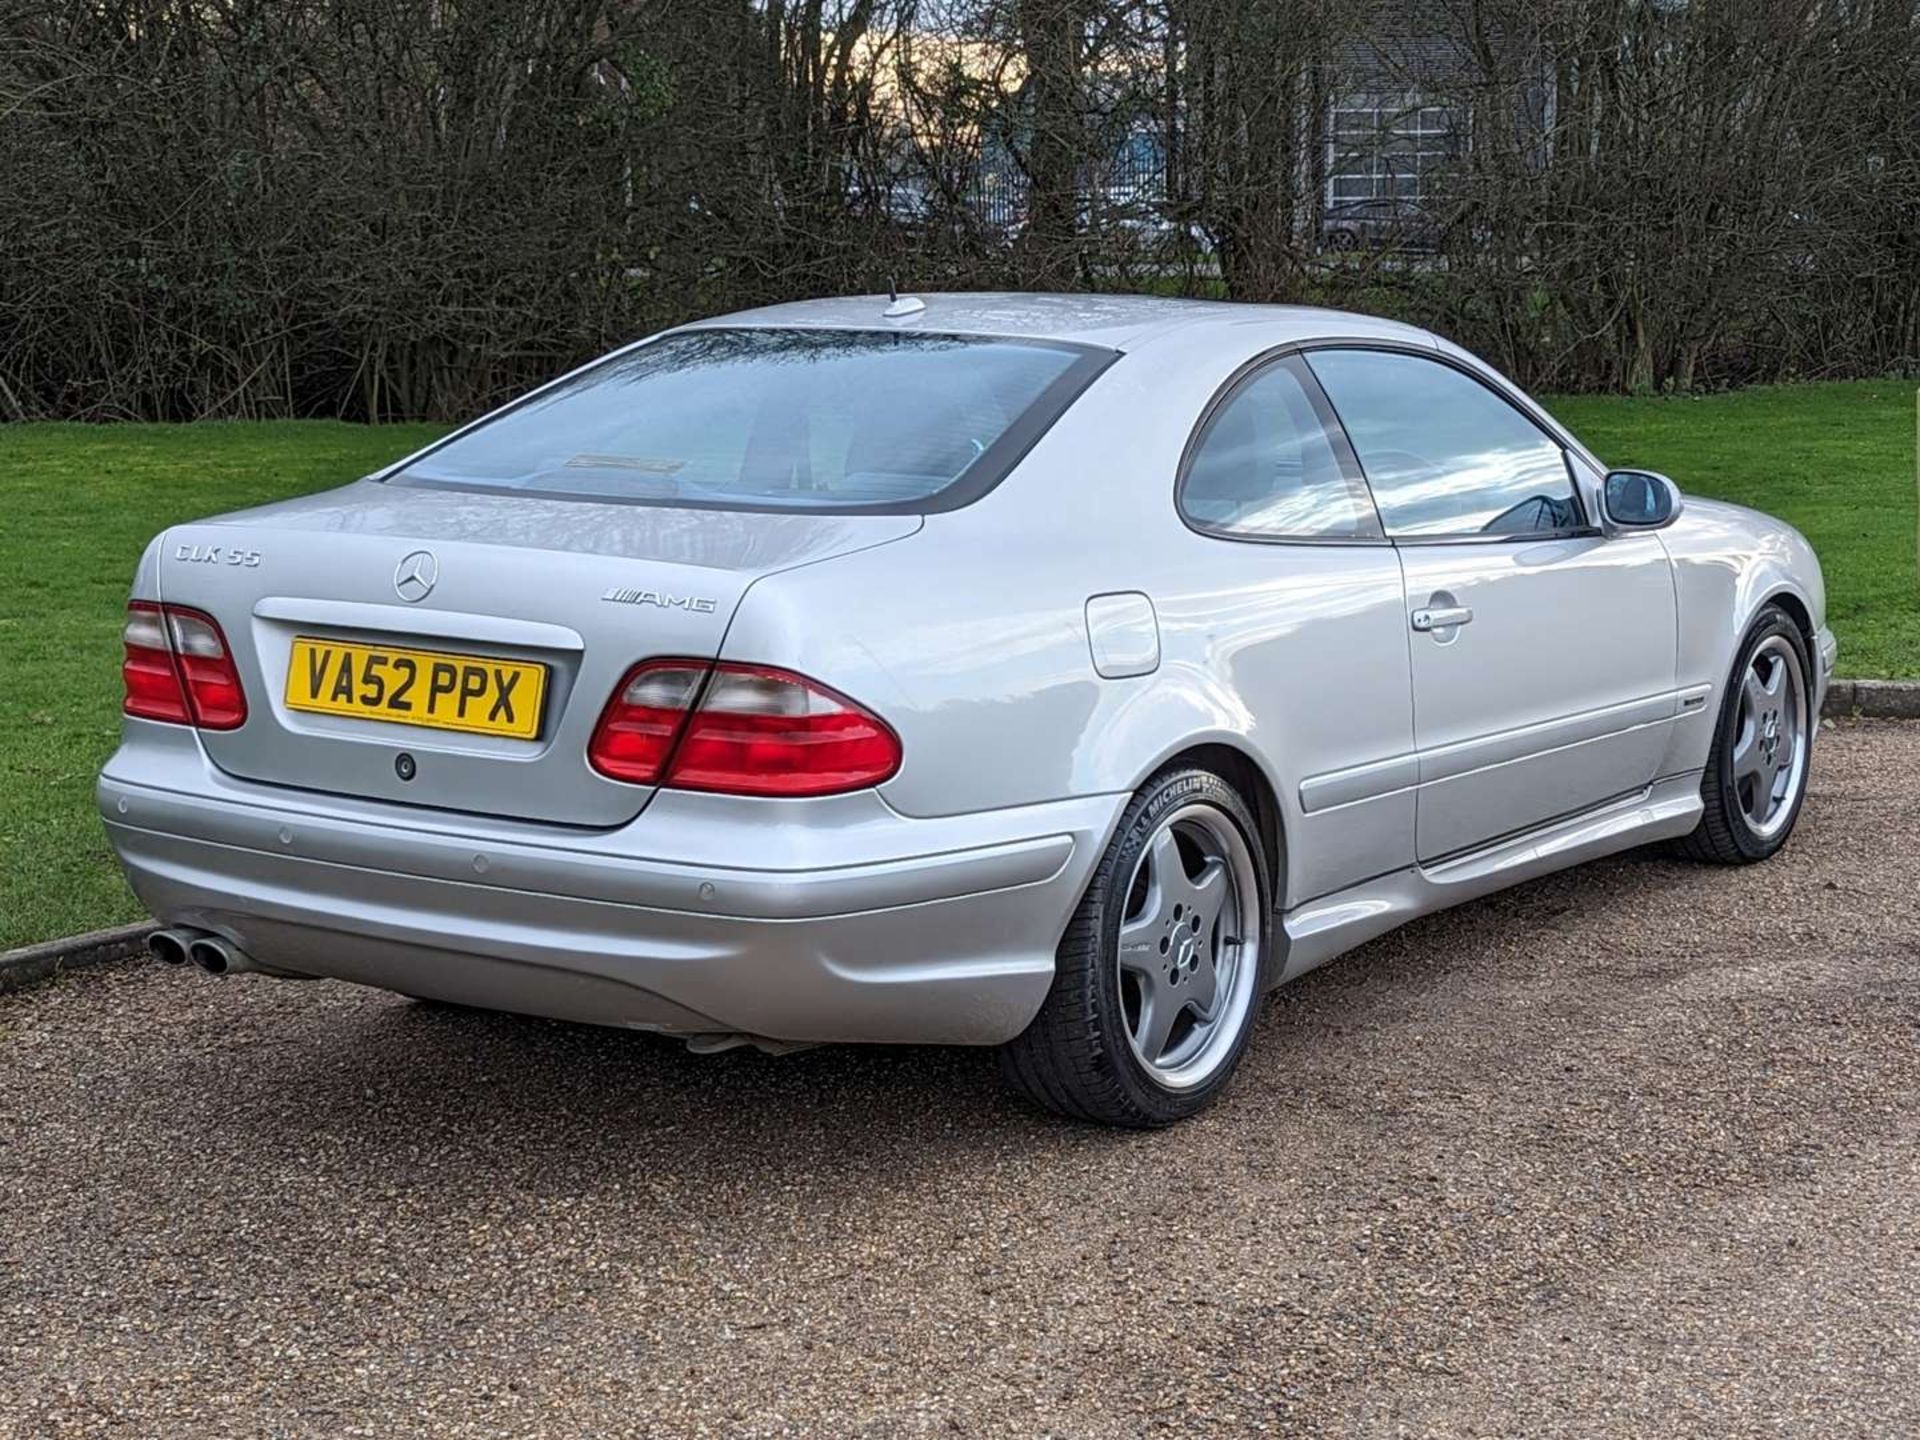 2002 MERCEDES CLK55 AMG COUPE - Image 7 of 28